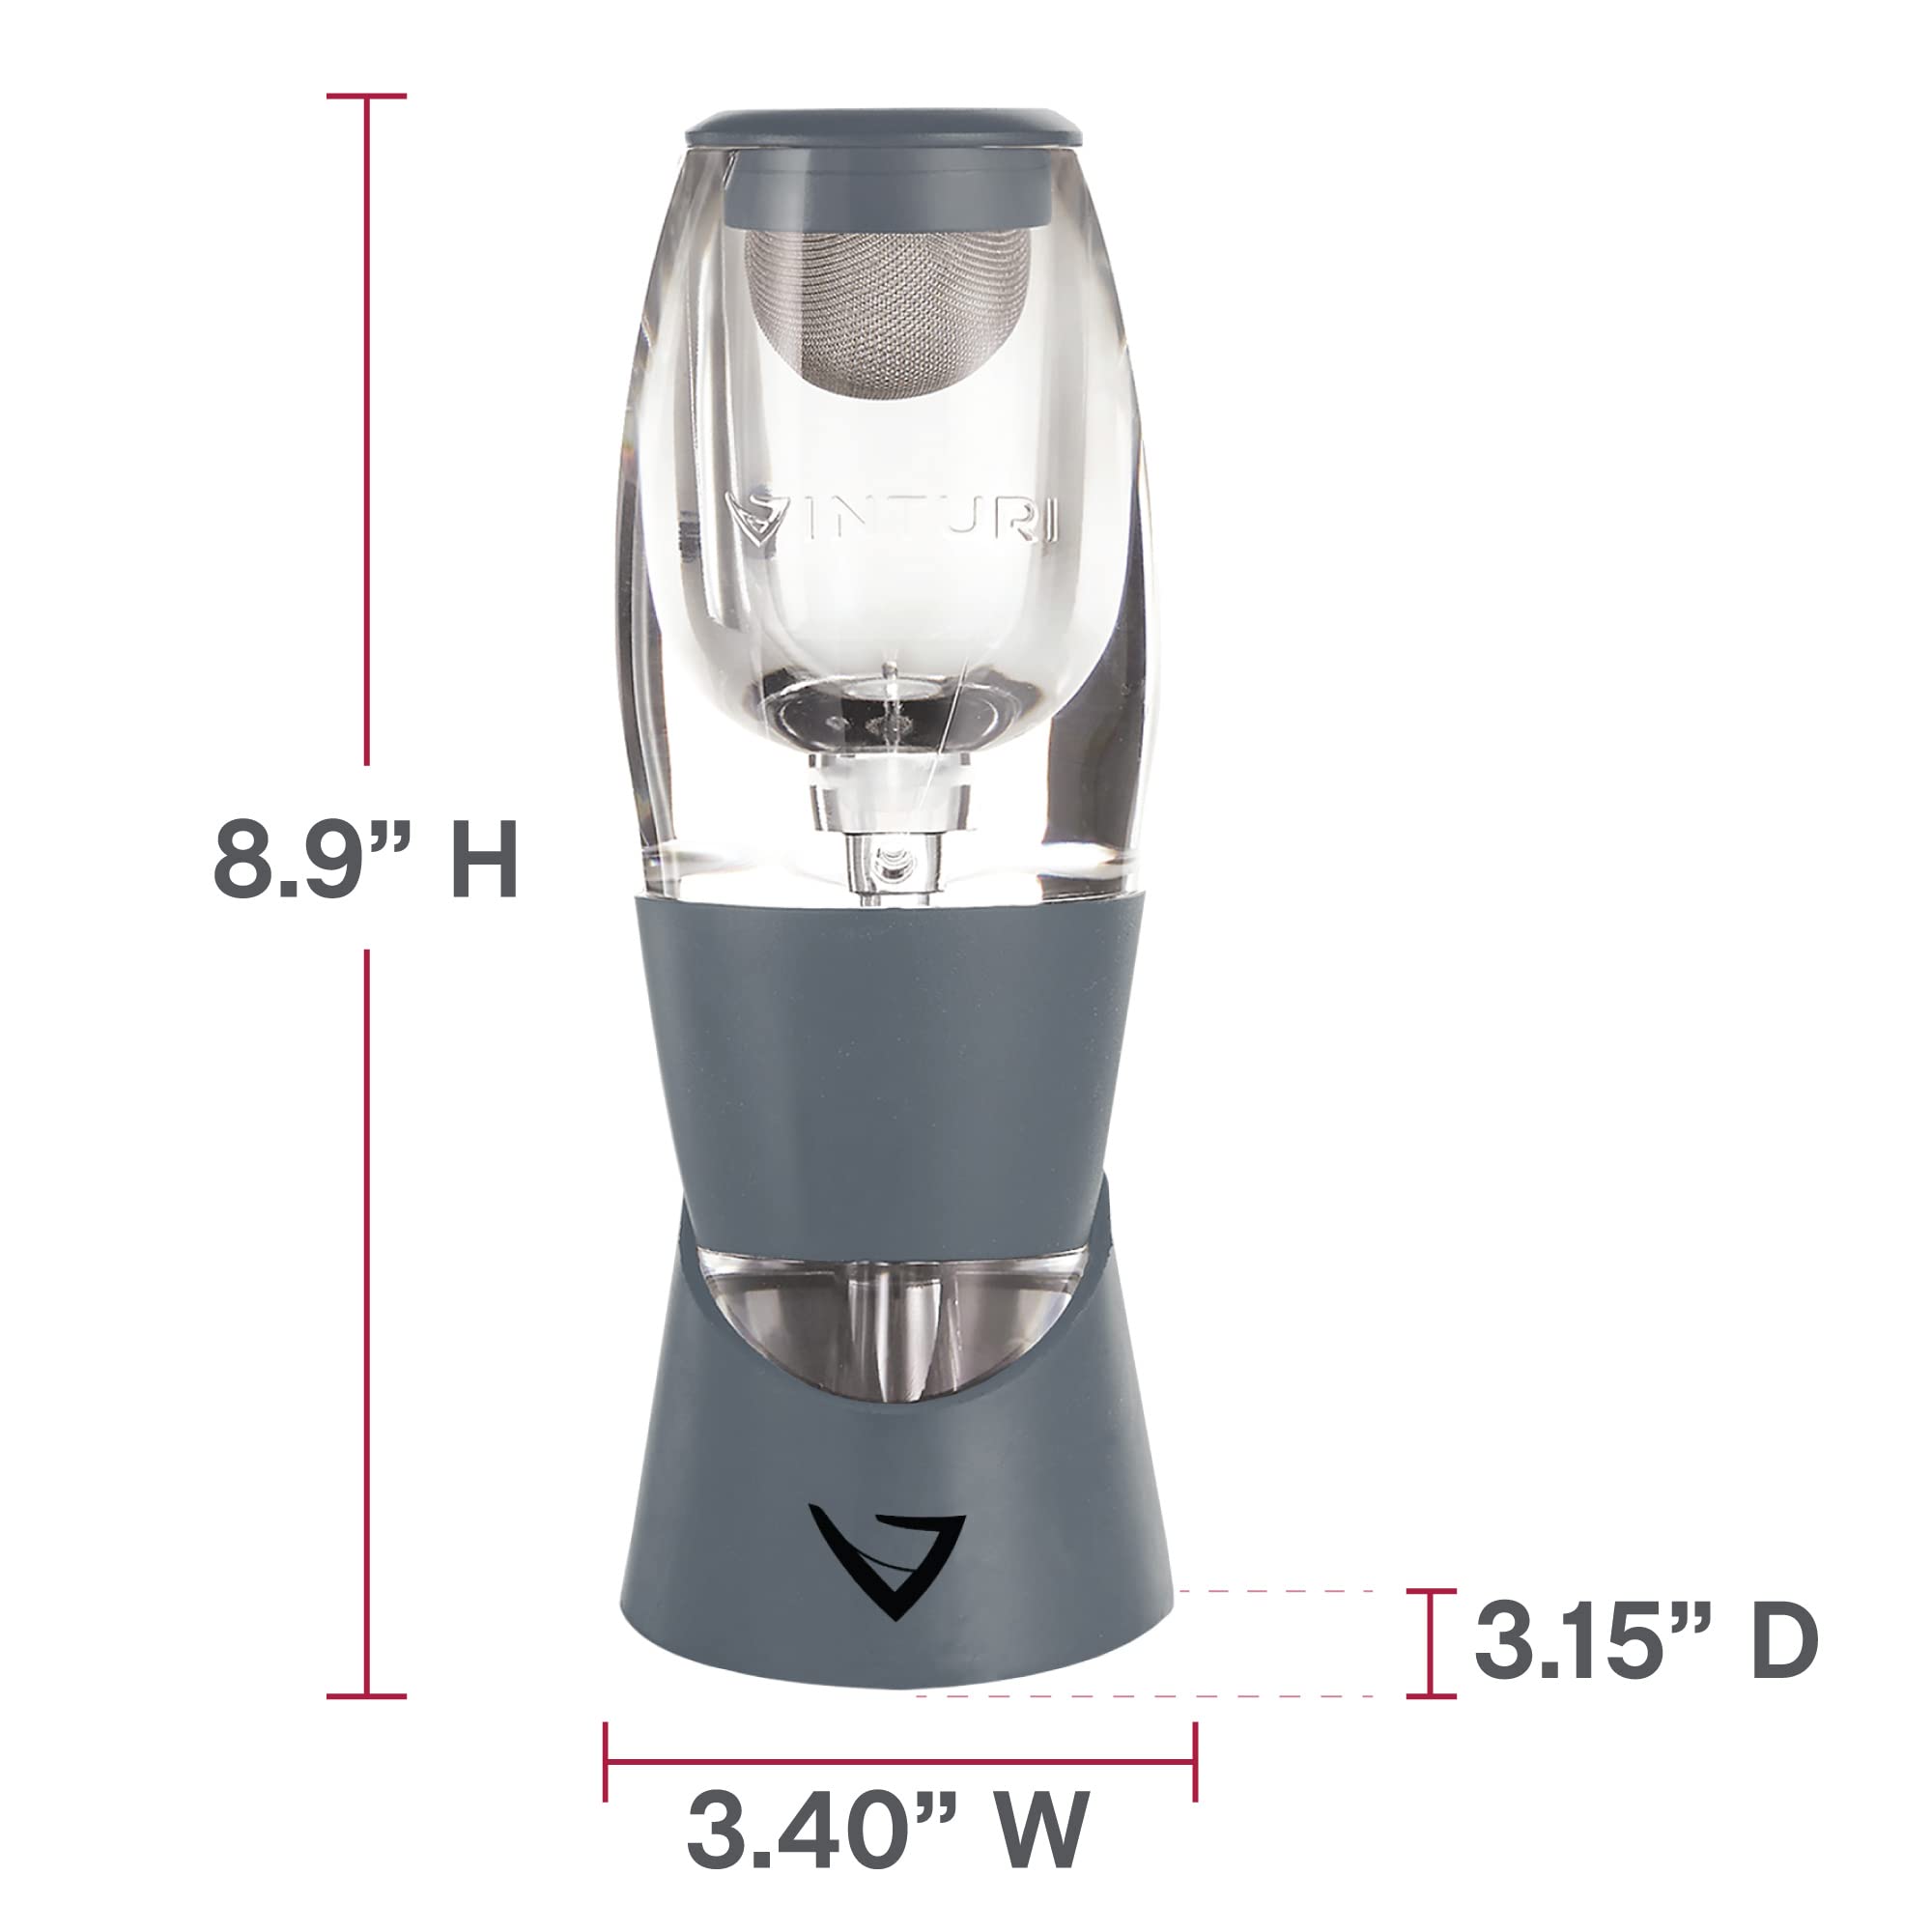 Vinturi Red Wine Aerator Pourer and Decanter Enhances Flavors with Smoother Finish, Includes No-Drip Base, Gray